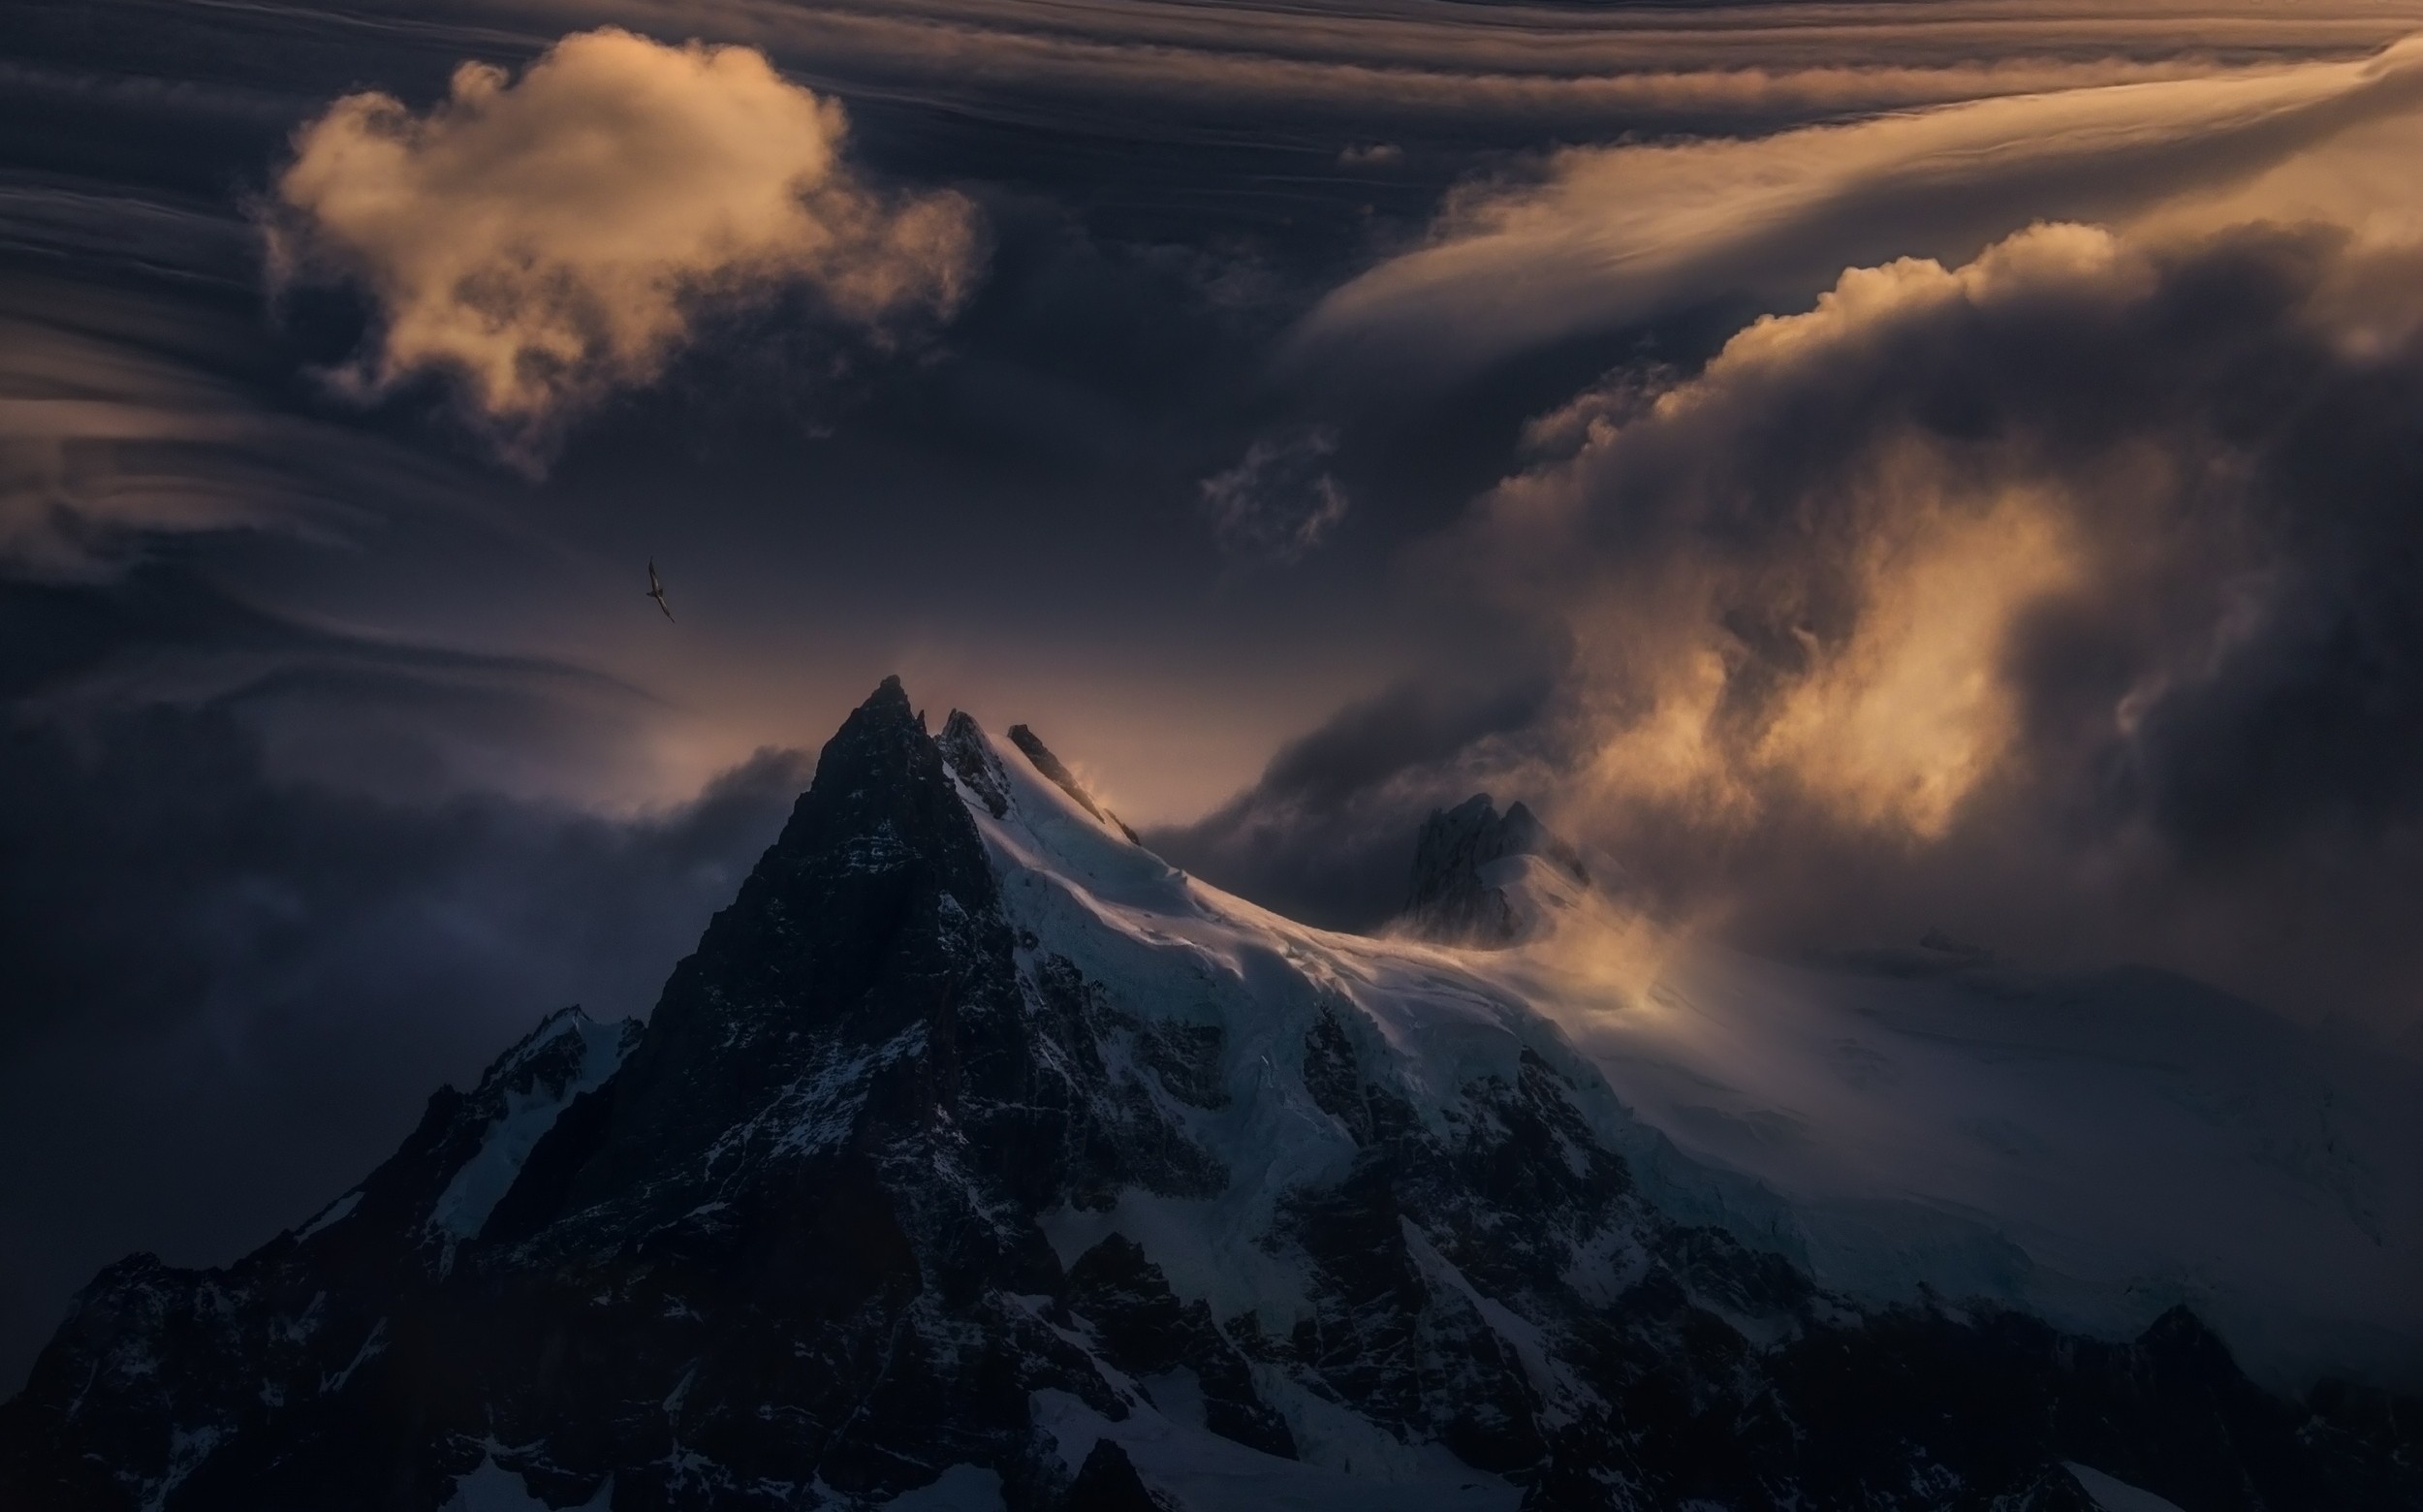 General 2500x1560 condors birds flying mountains clouds sunlight snowy peak nature landscape